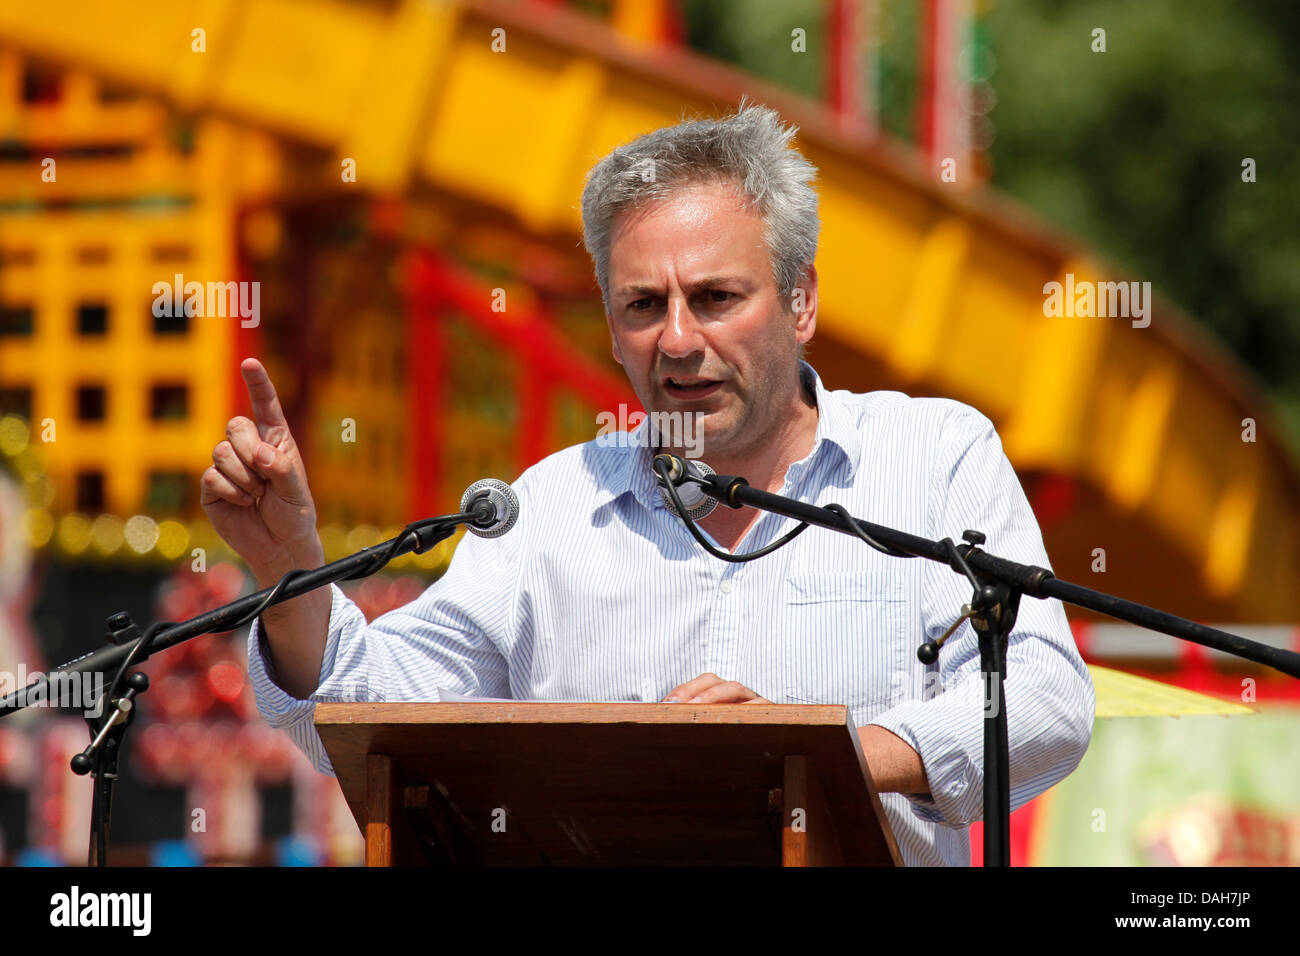 Kevin Maguire speaking at the 129th Durham Miners Gala at Durham, England. Maguire is a Daily Mirror associate editor and New Statesman columnist. Stock Photo